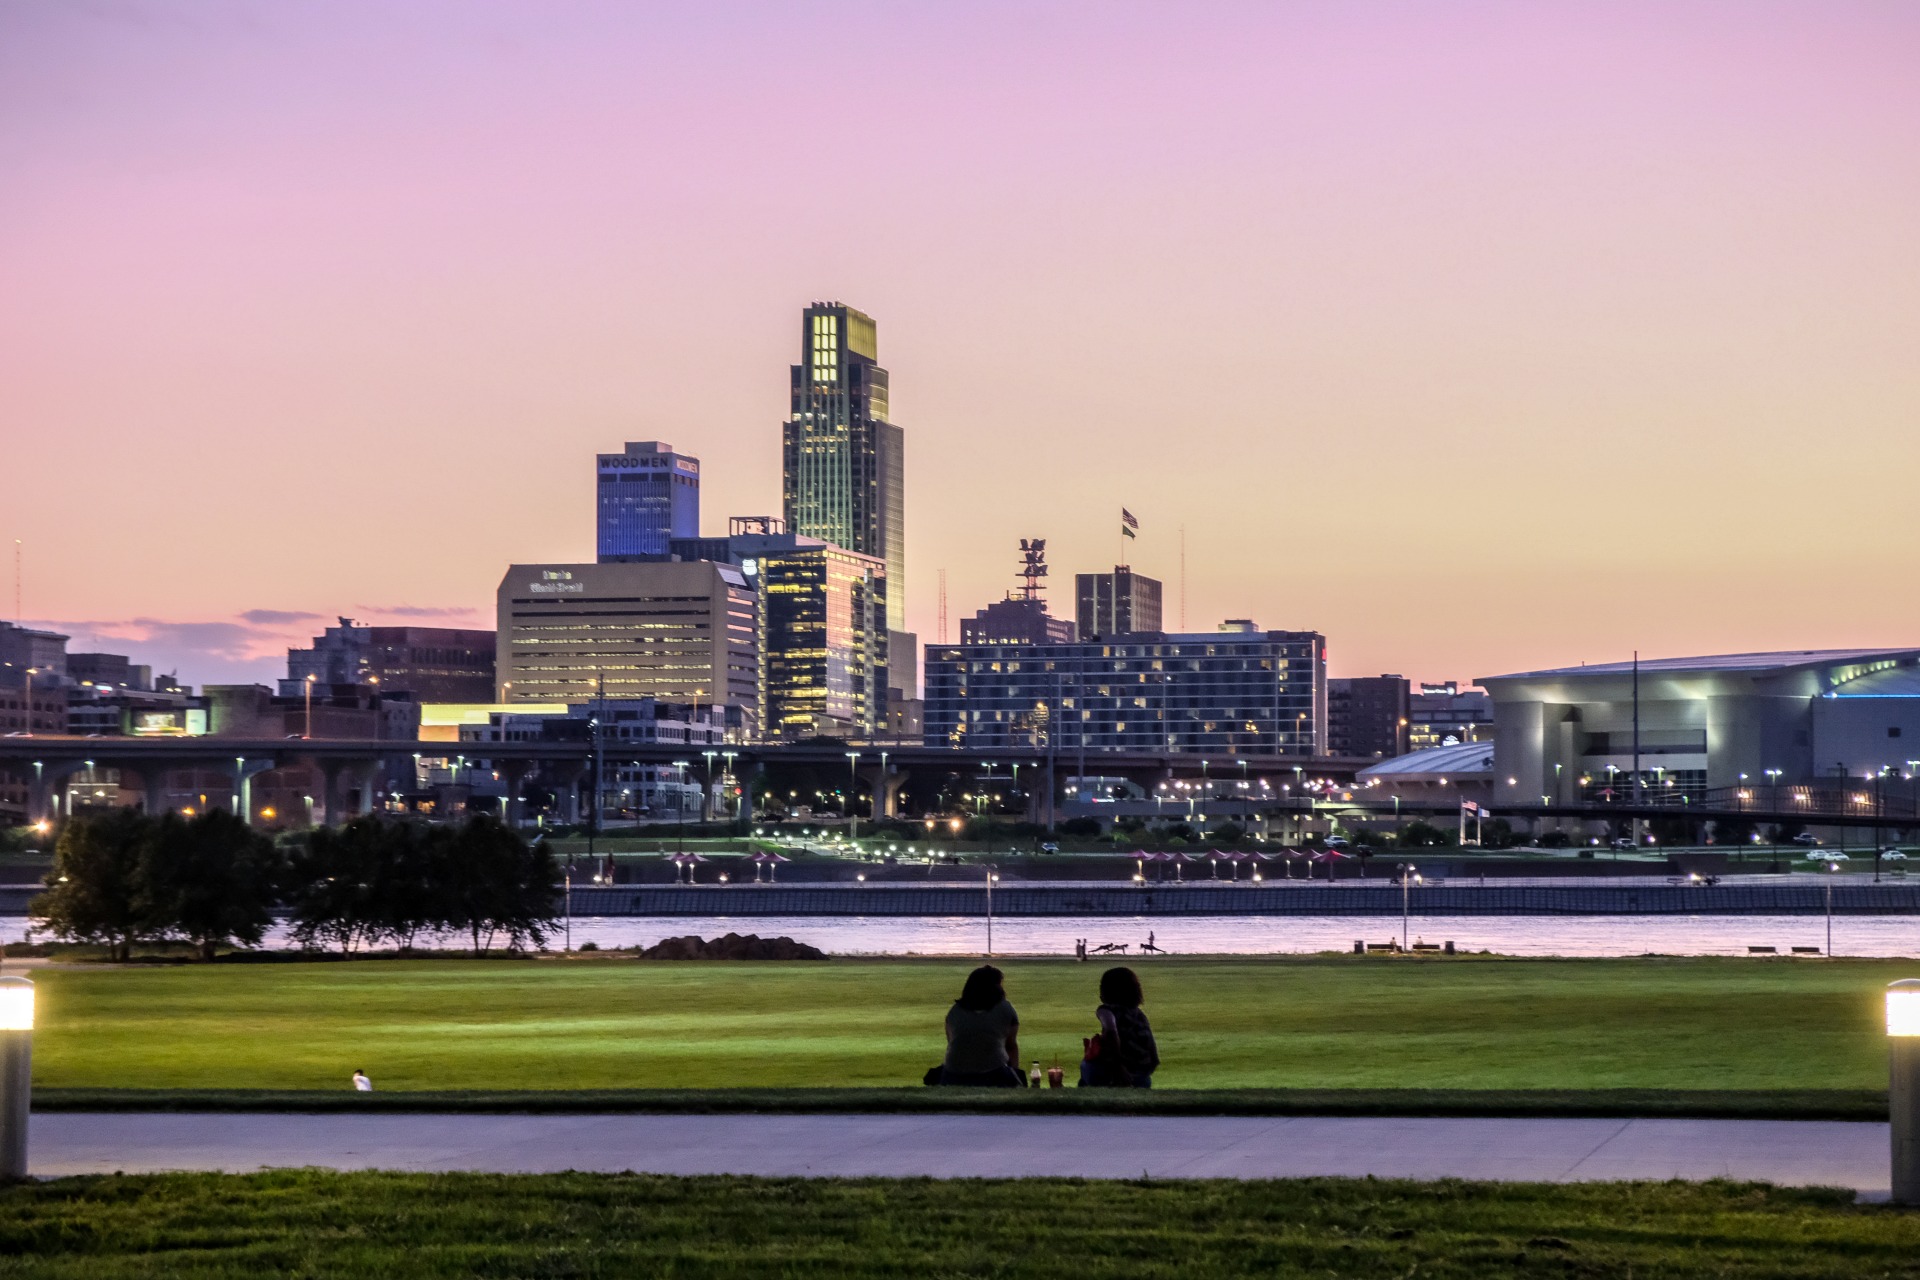 A couple have a picnic with the Omaha skyline in the background